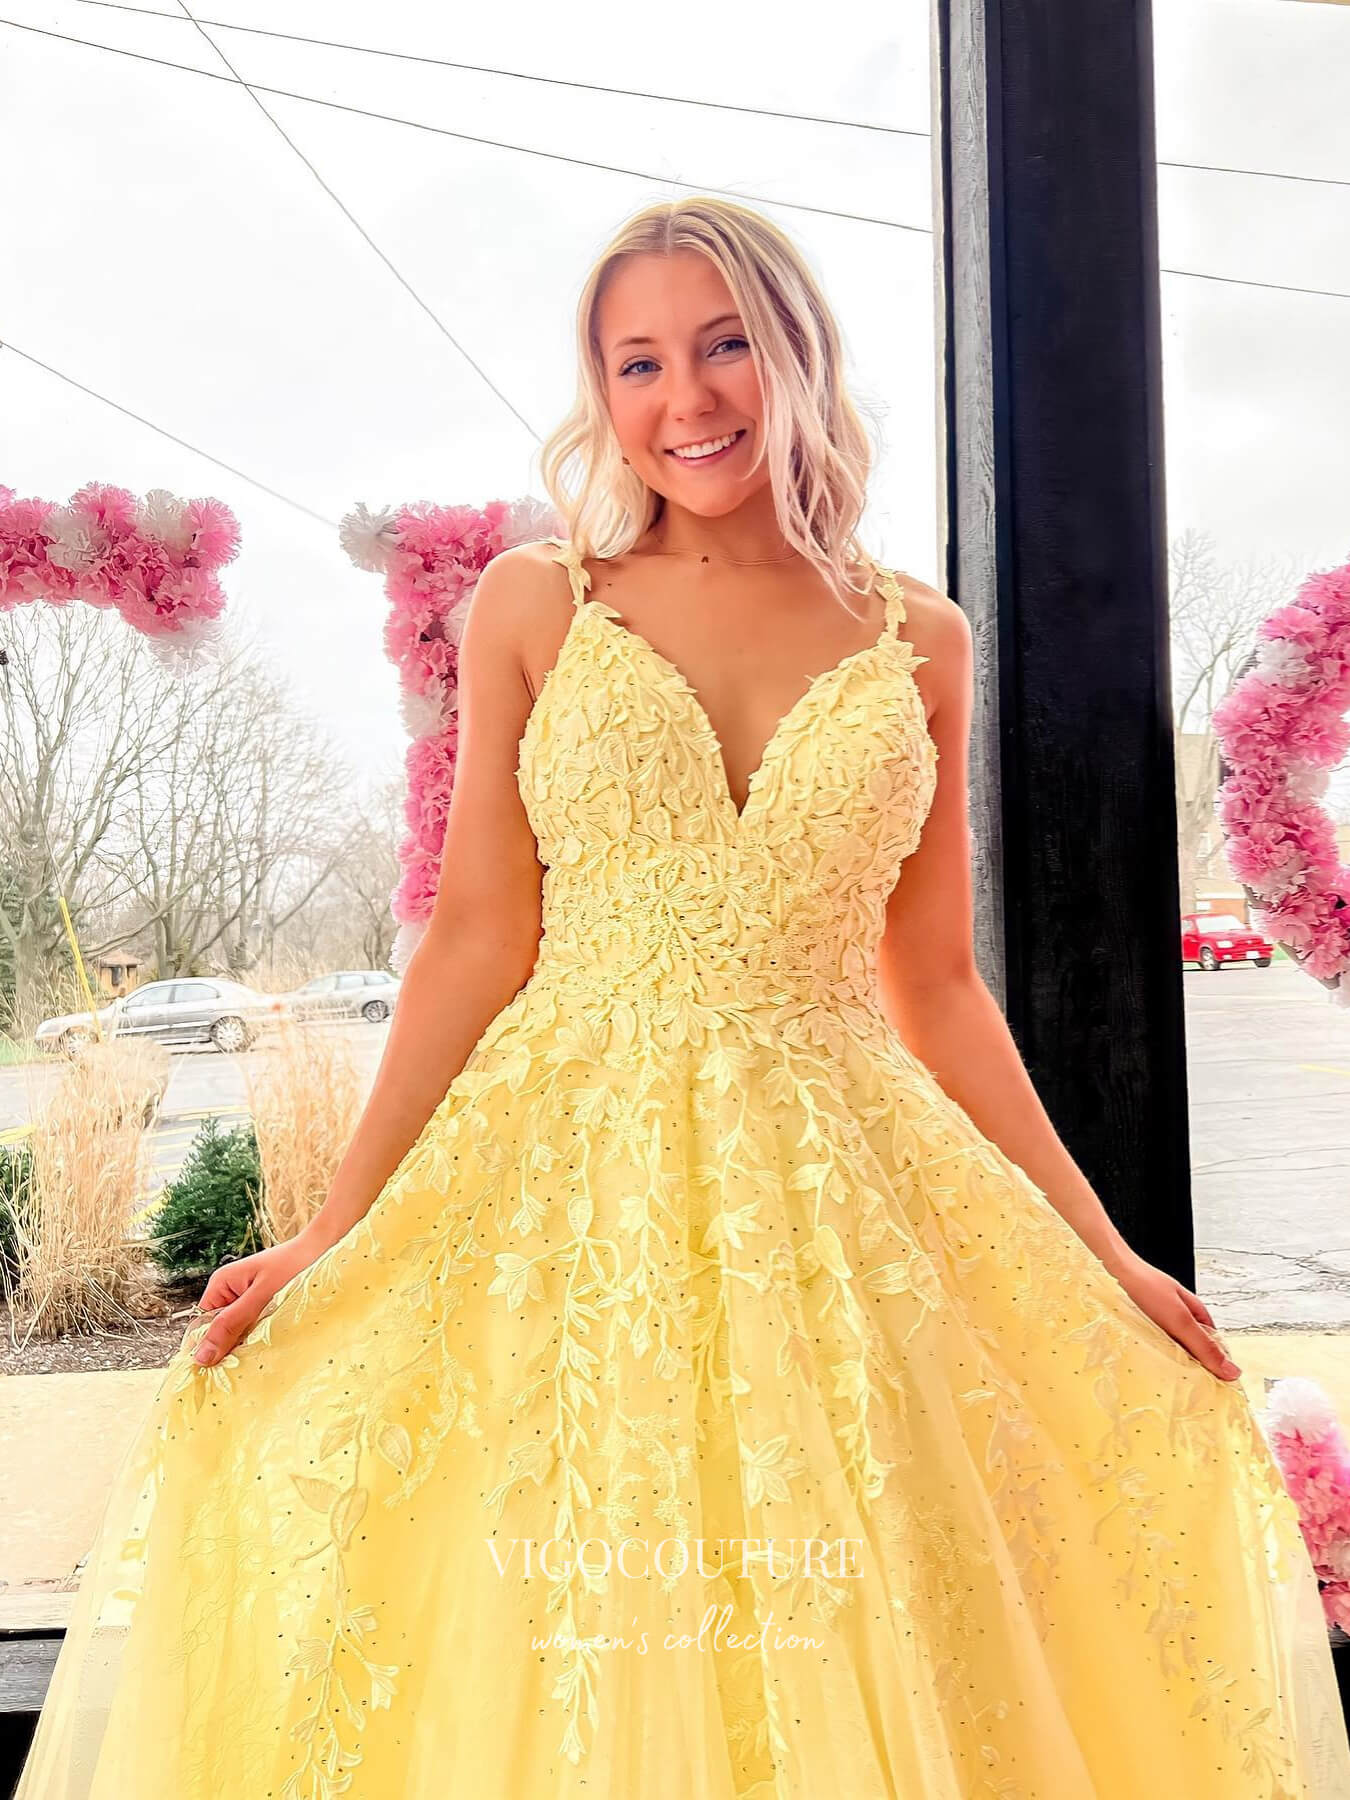 Yellow Cut-out Lace Sheer Tulle Sleeved Prom Dress - Promfy